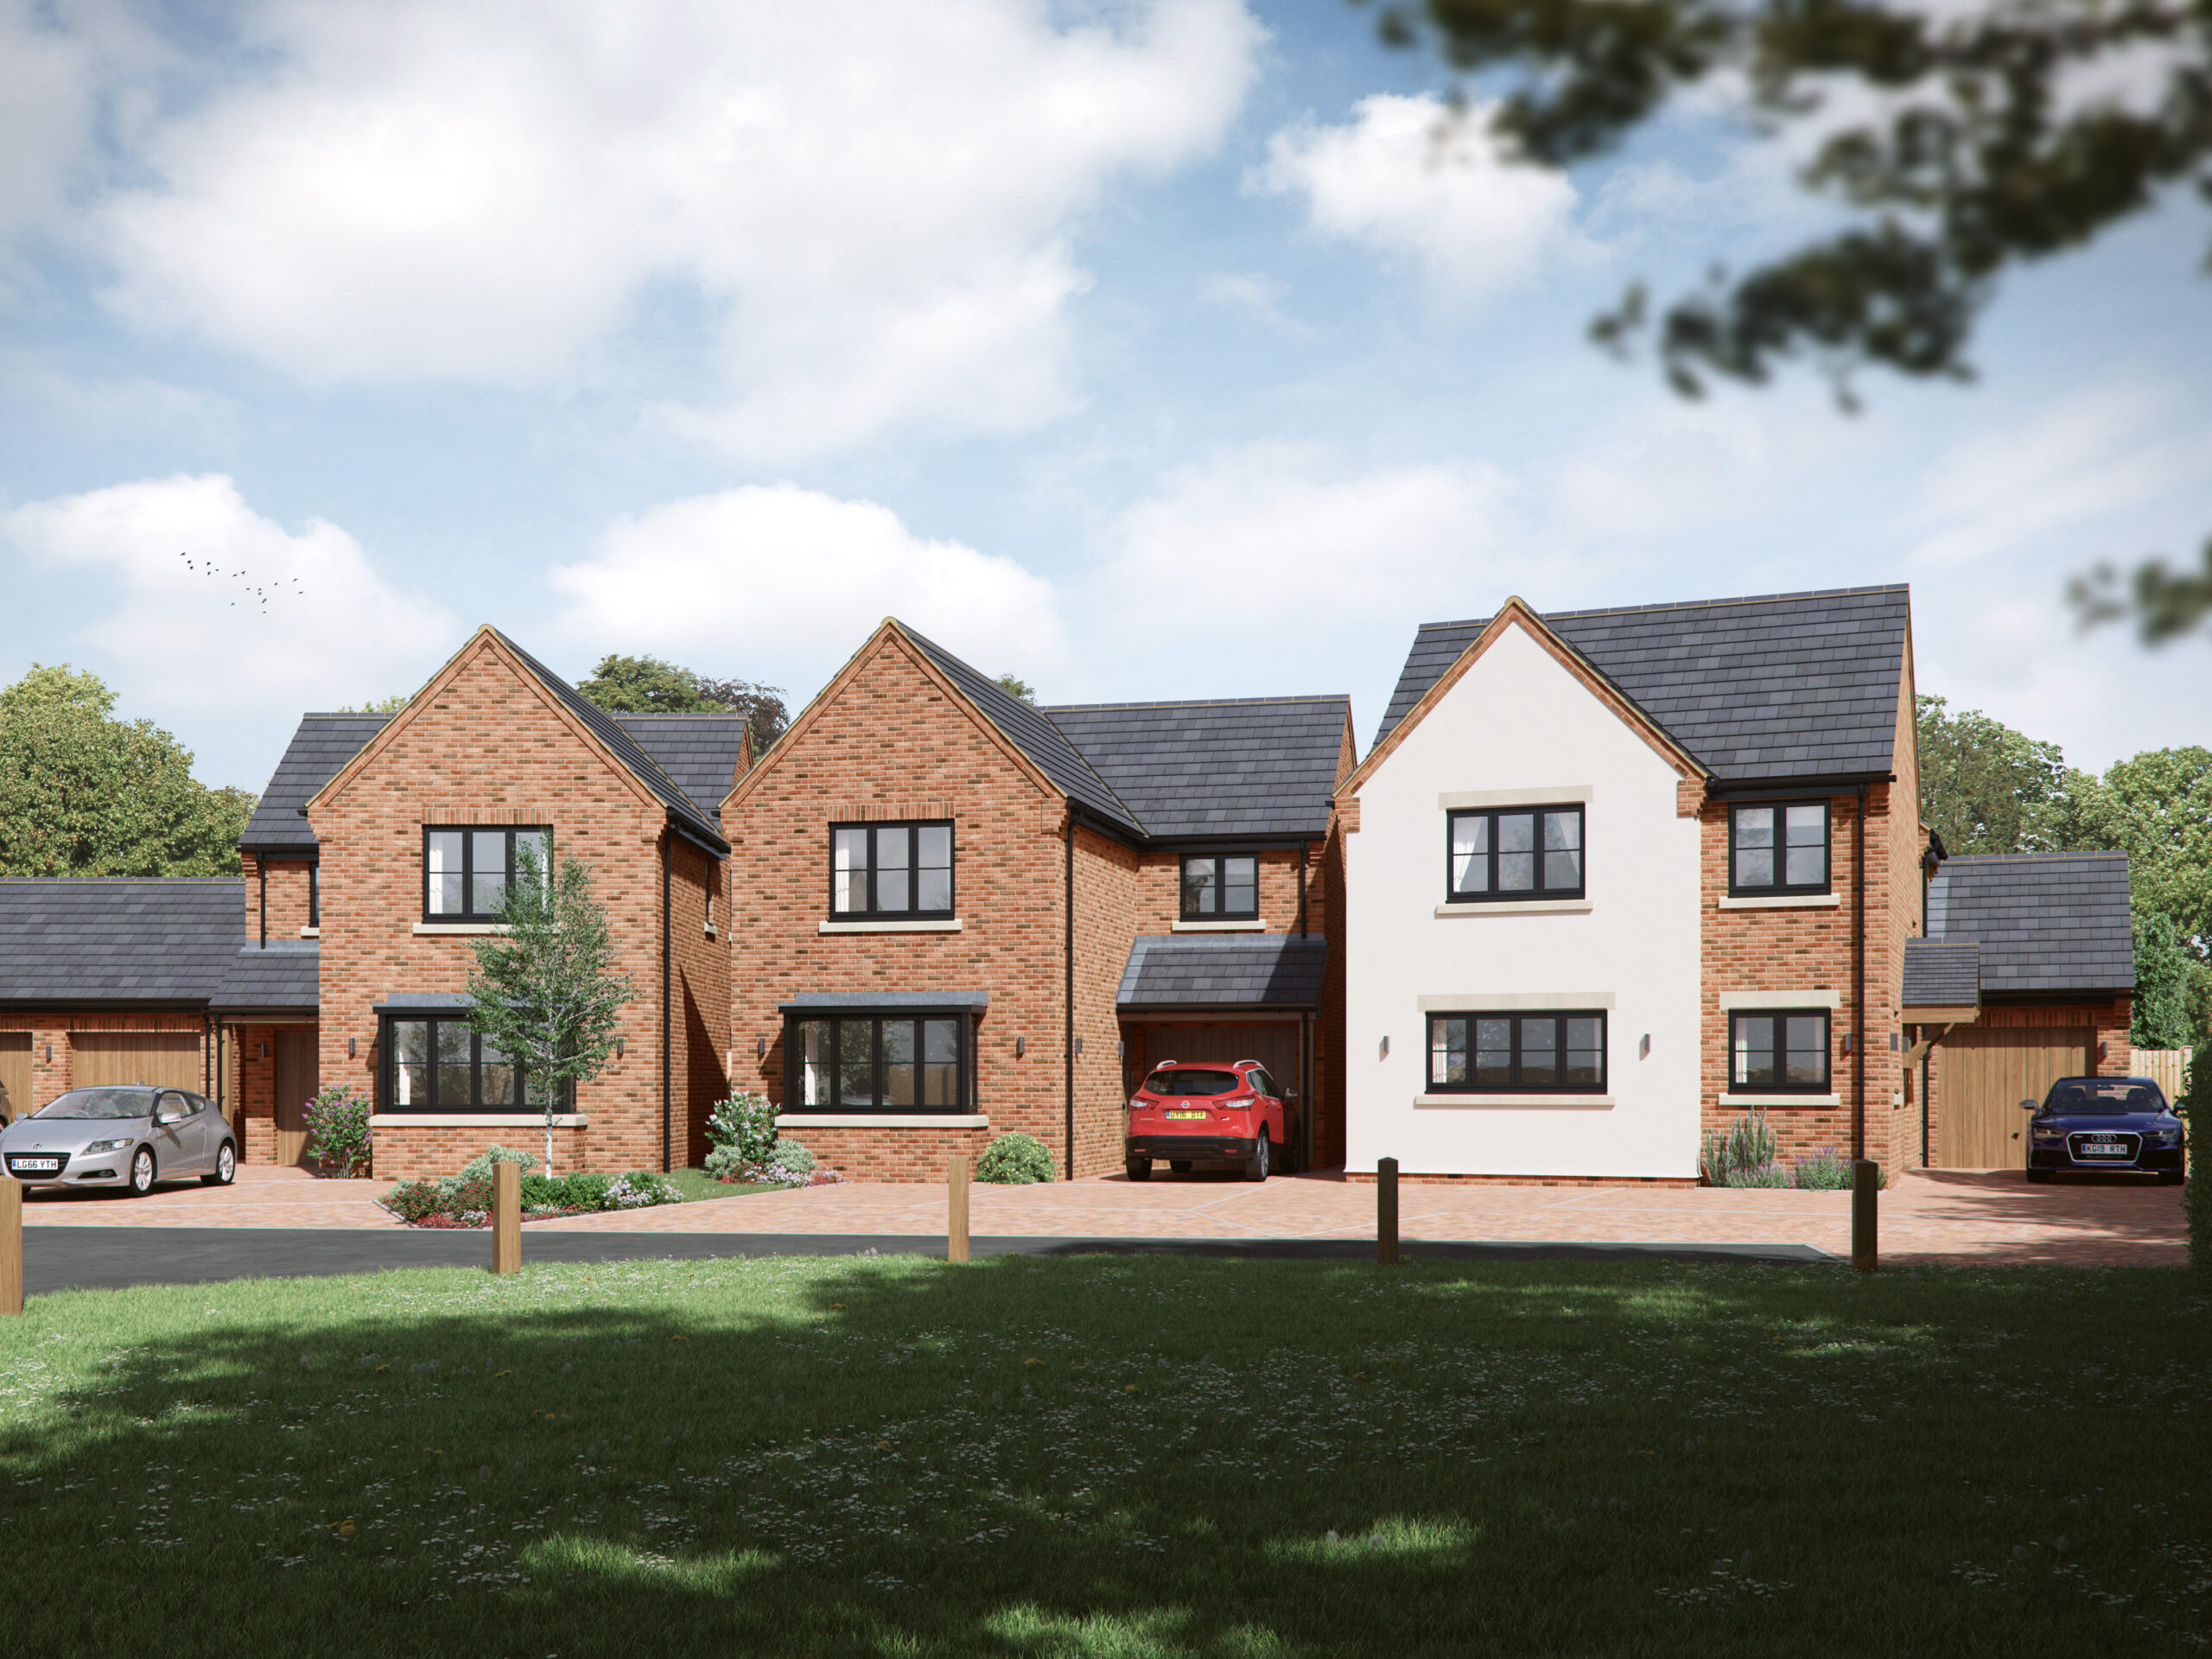 10 new homes confirmed for Higher Heath